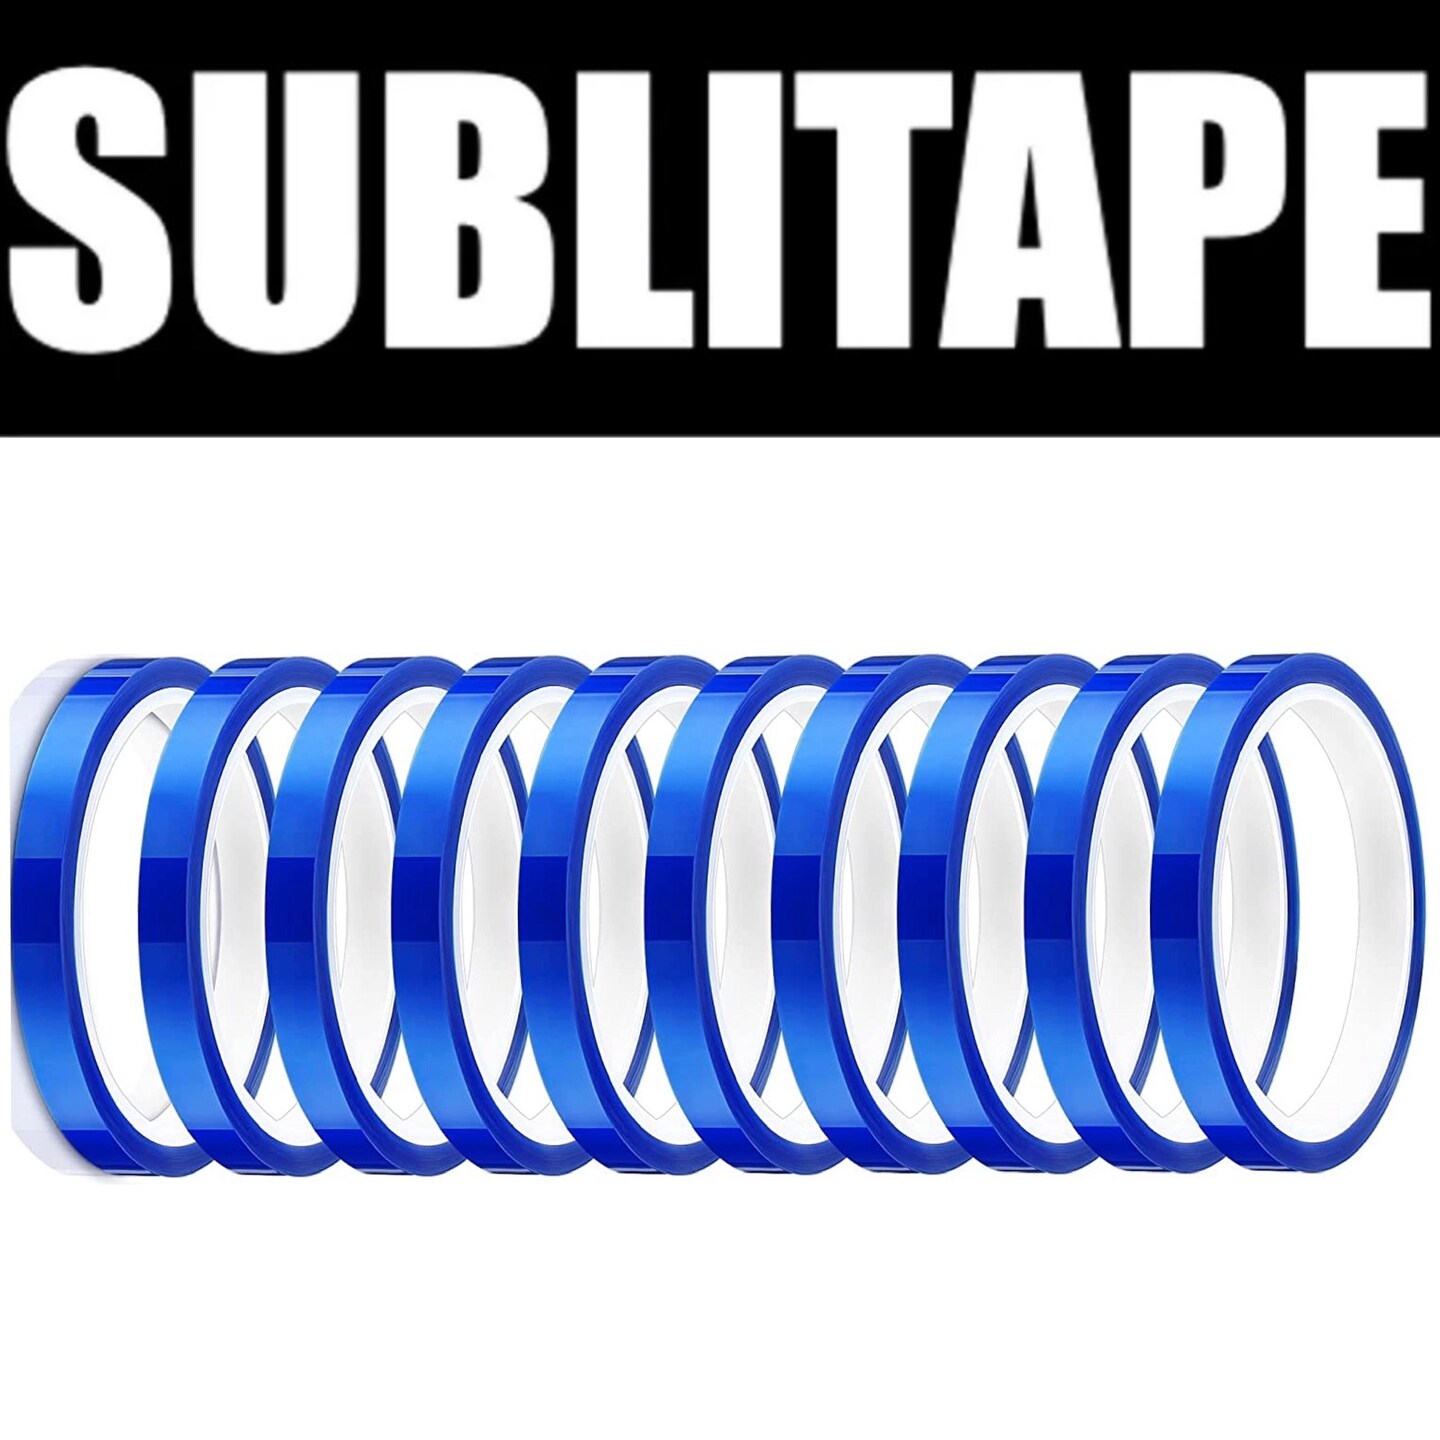 10 rolls Heat resistant tapes sublimation Press Transfer Thermal Tape 10mmx30m SUBLITAPE BLUE